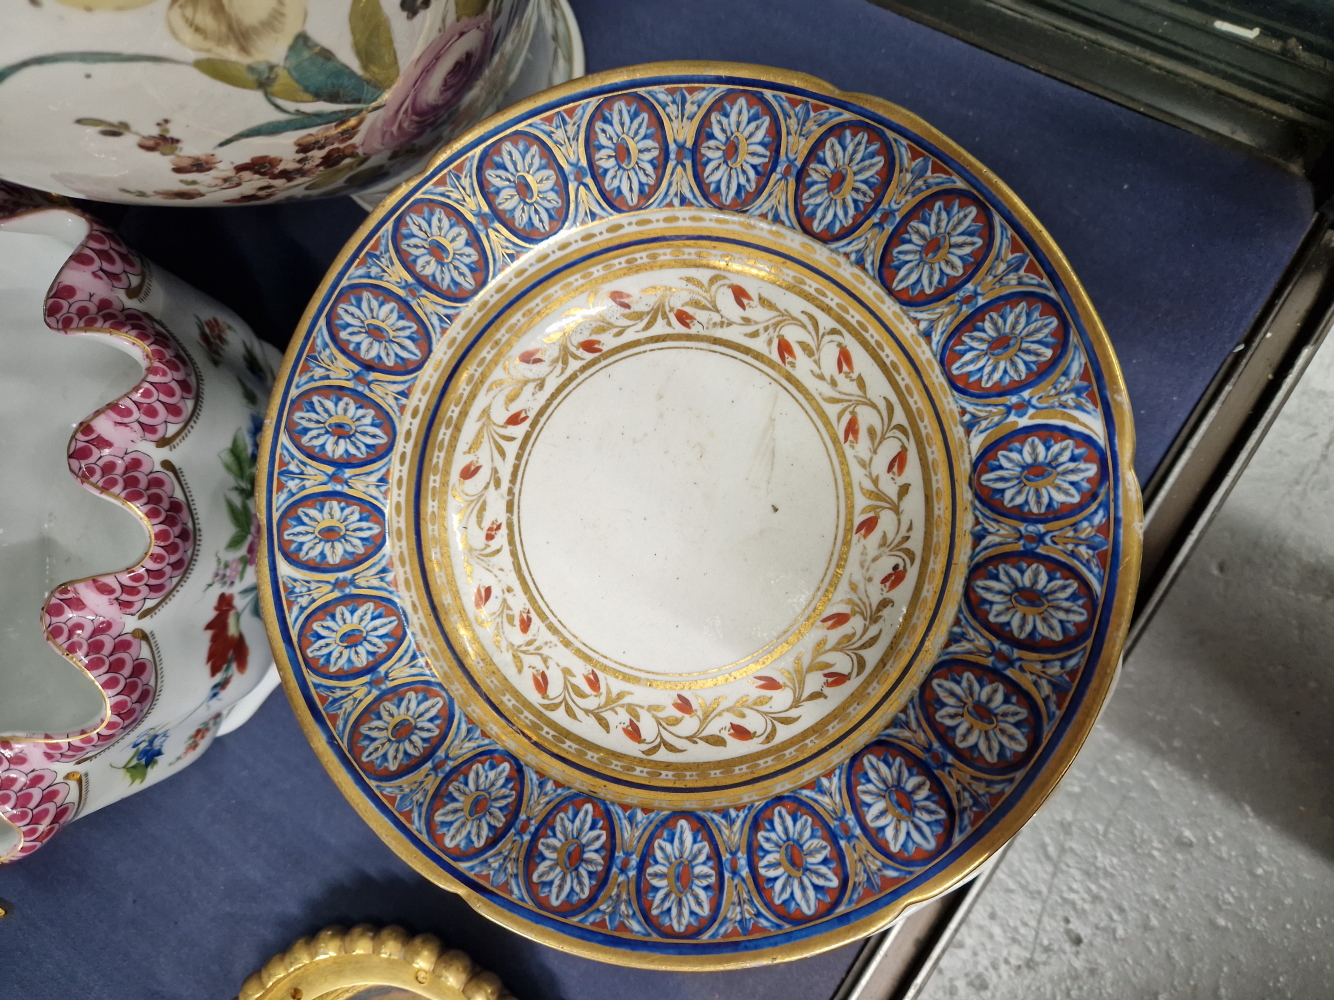 A SET OF SIX BLUE AND WHITE FLORAL PLATES, CROSSED SWORDS MARKS, TWO ENGLISH SOUP PLATES, A - Image 2 of 6